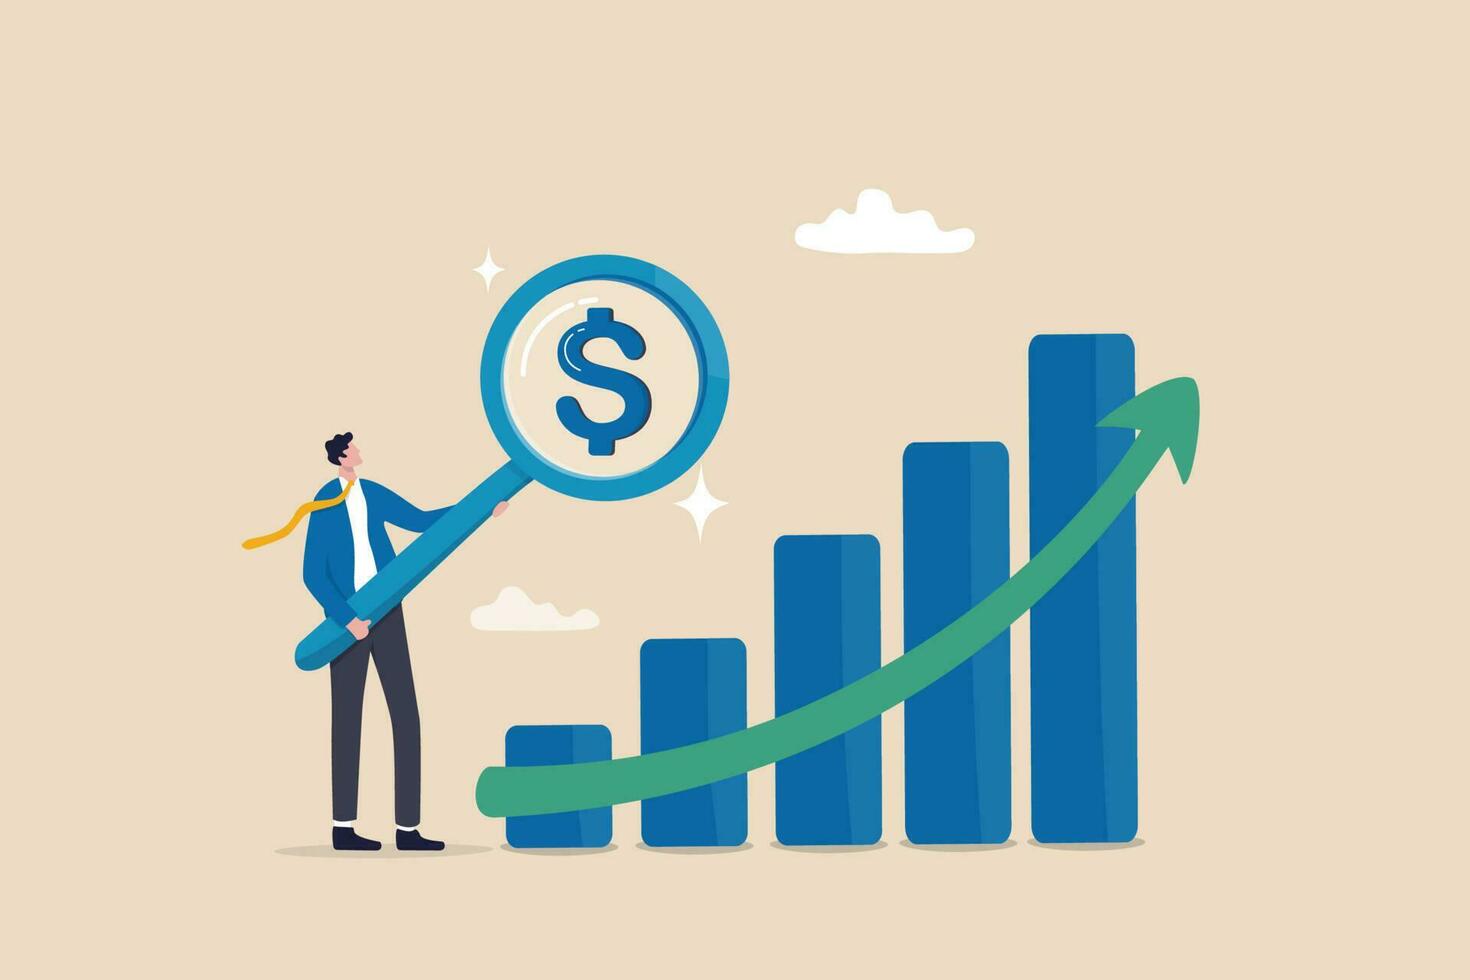 Revenue or salary increase, growth investment profit or earning from stock market, money or wages growing concept, businessman with magnifying glass on dollar money sign with growth graph and chart. vector